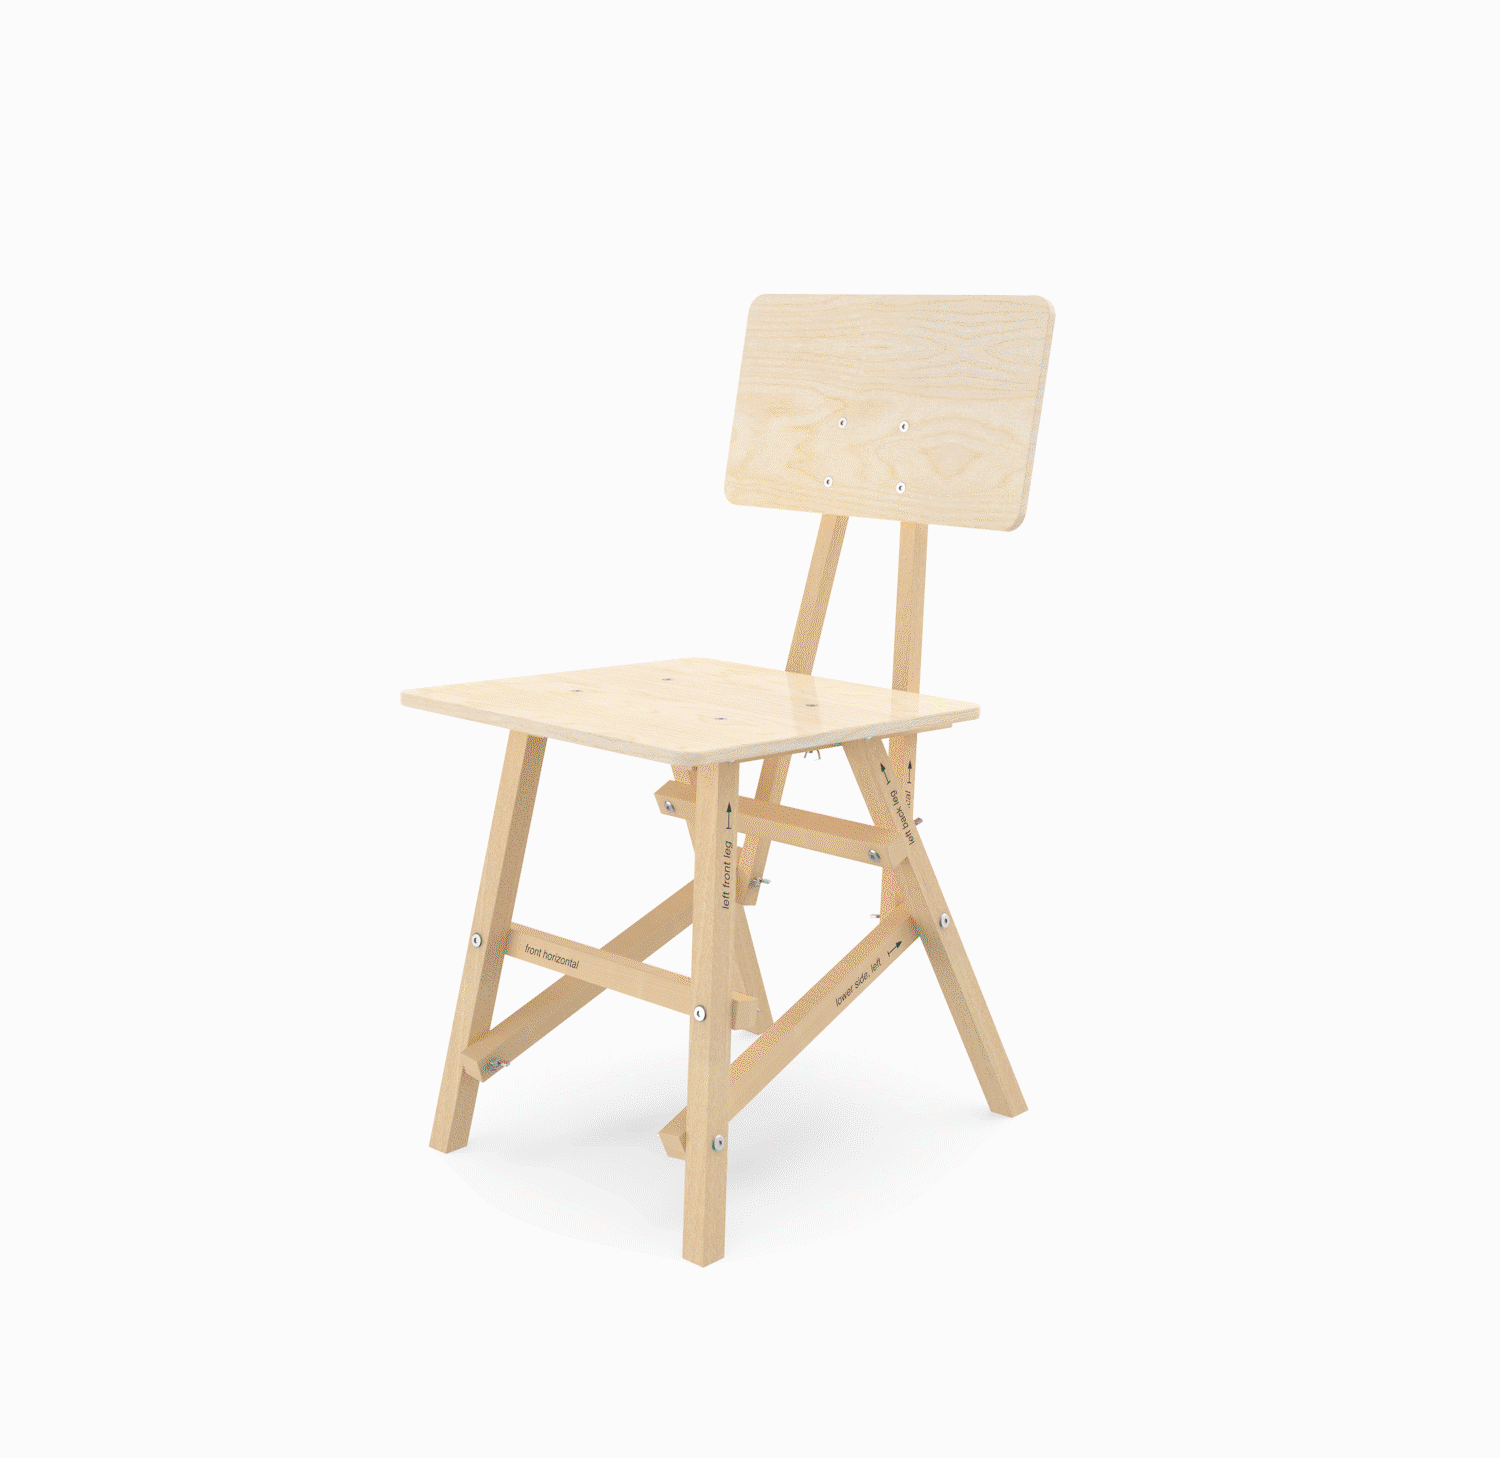 DIT Chair, wooden chair, example of different colours. Self assembly, beech and plywood. Design by Tord Boontje.